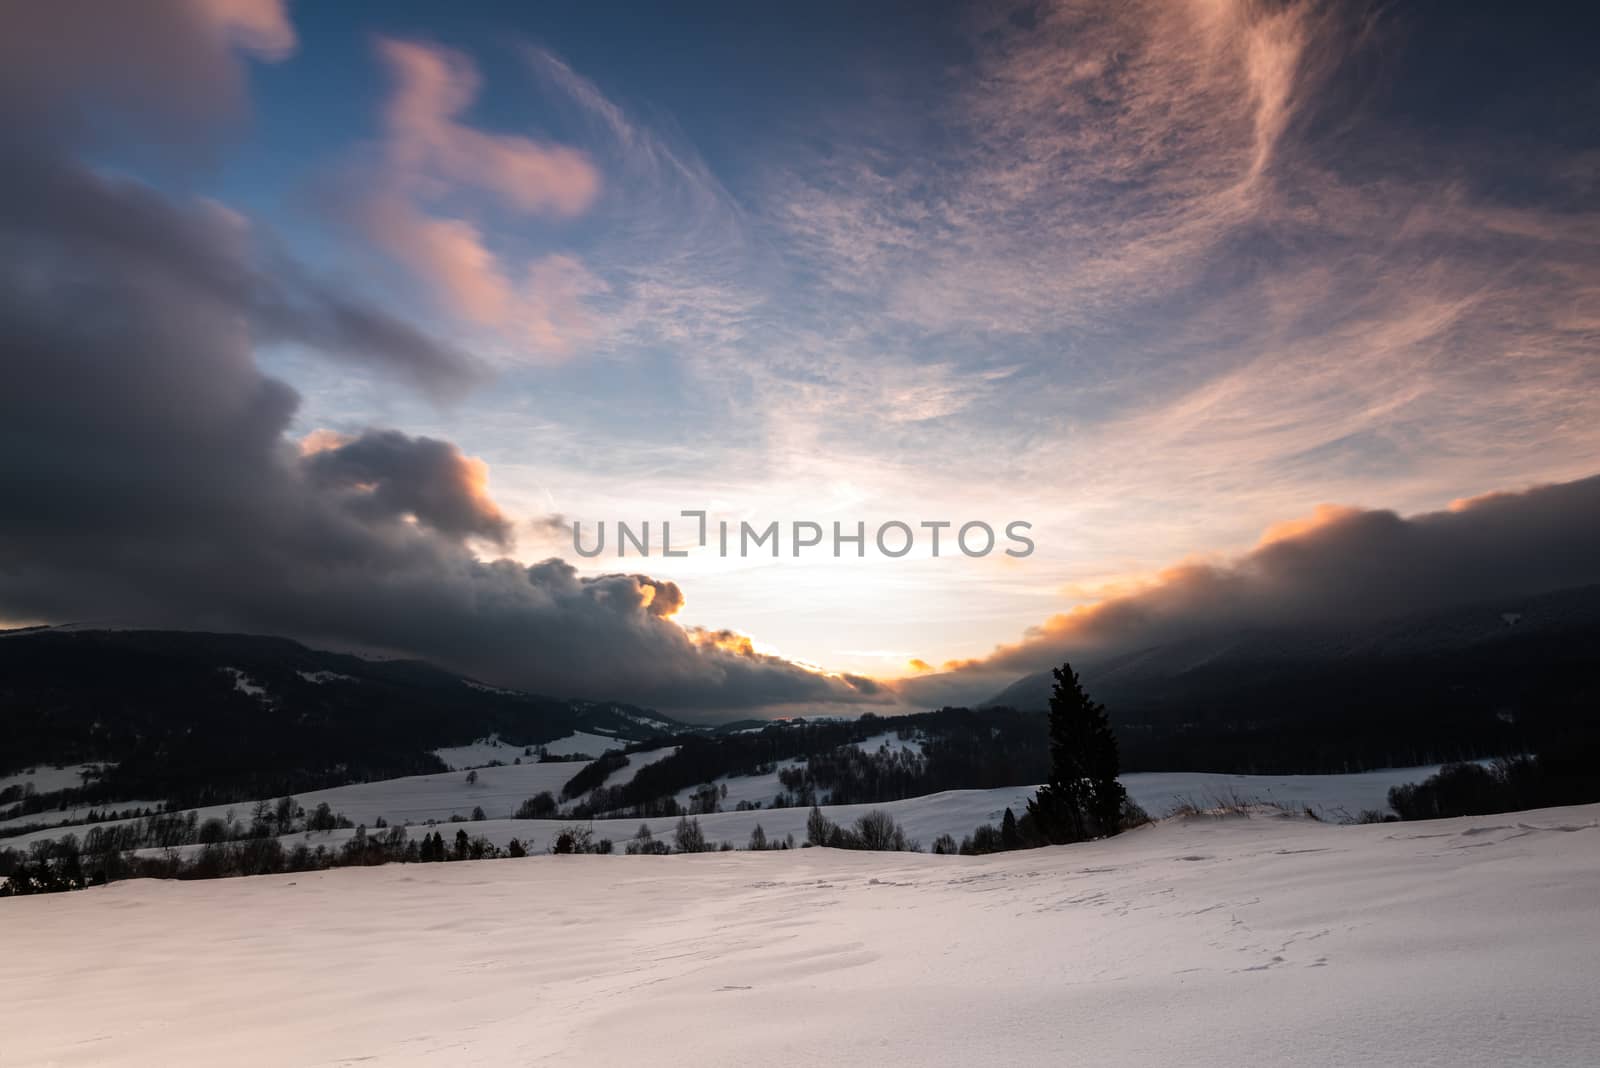 Sunrise at Bieszczady Mountains in Carpathia, Poland at Winter S by merc67